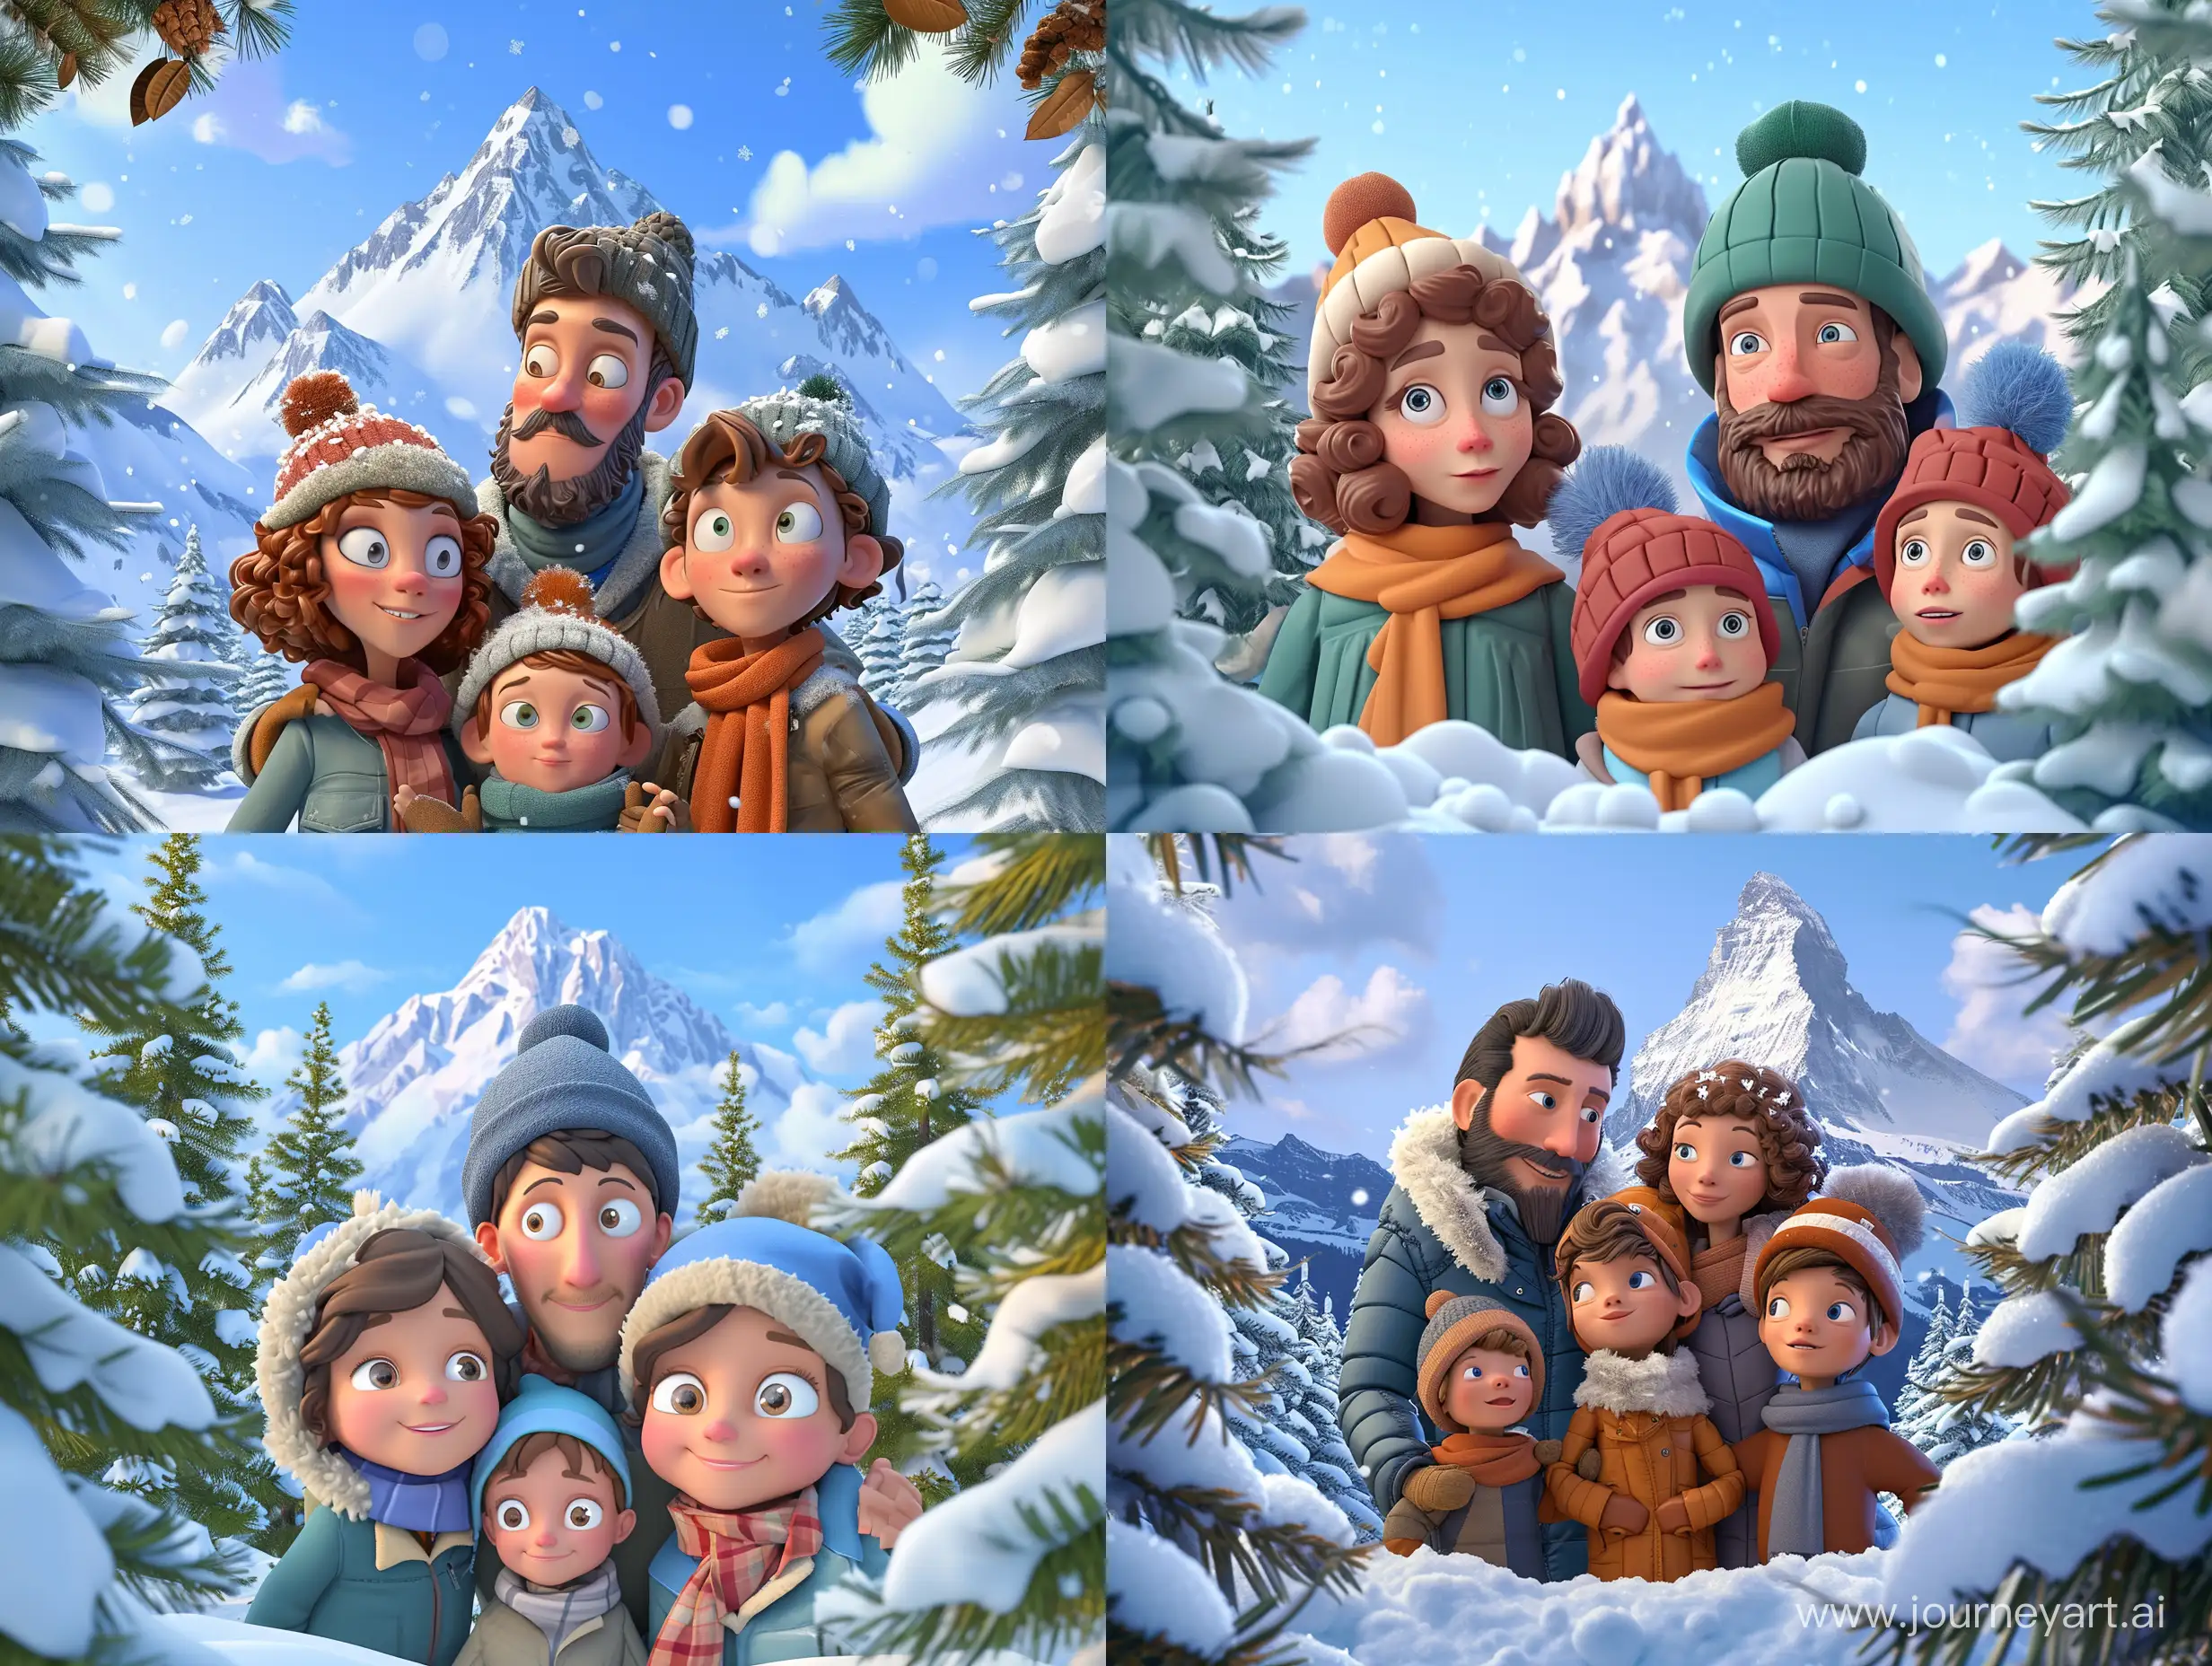 3d style. Family (mom dad and 2 kids) looking at us who is dressed in warm winter gear and in the background is a snowy mountain, and on the sides are snowy fir trees